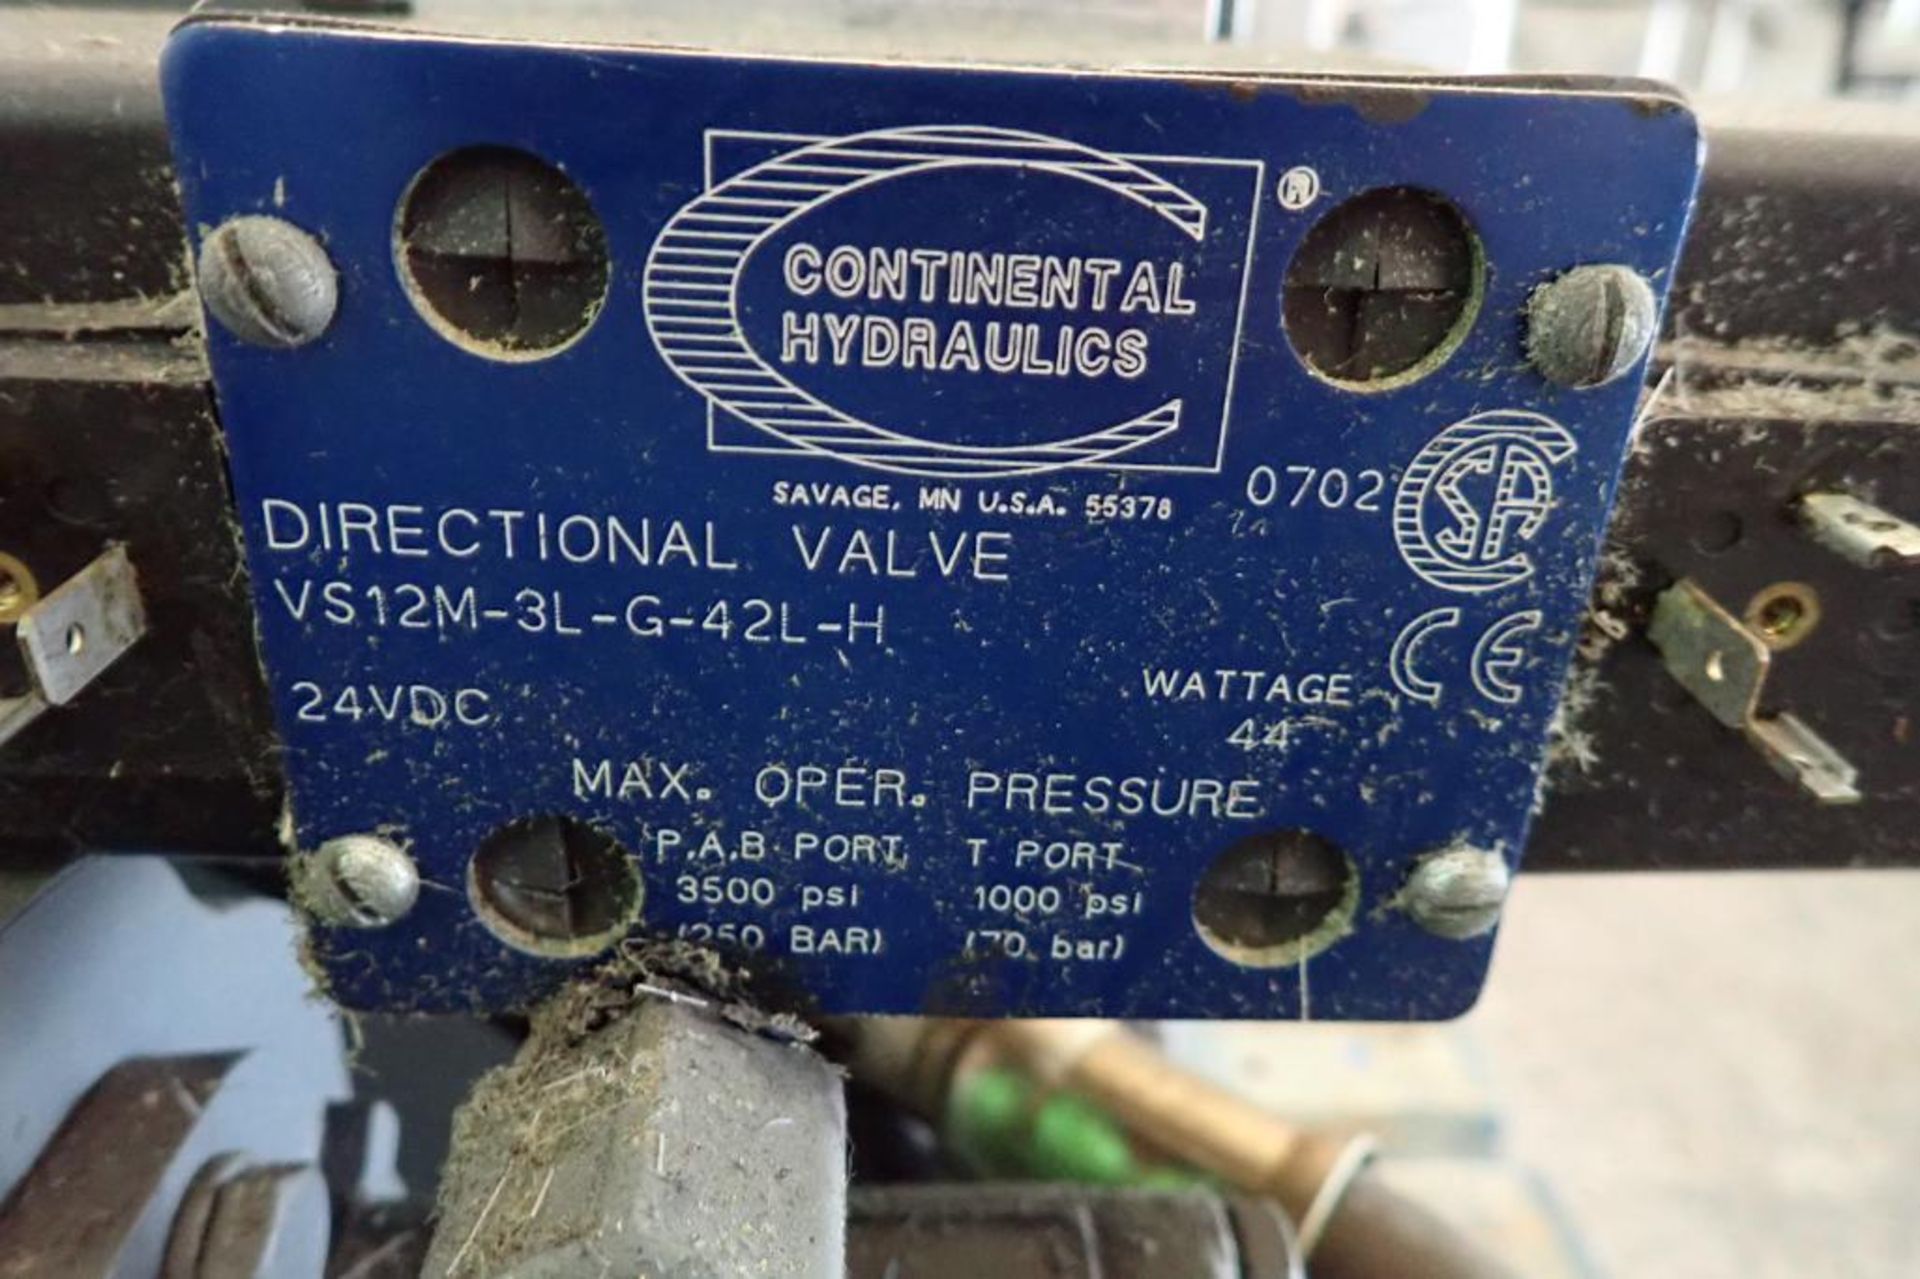 Continental hydraulics hydraulic power pack, 15 hp motor { Rigging Fee: $25} - Image 4 of 12